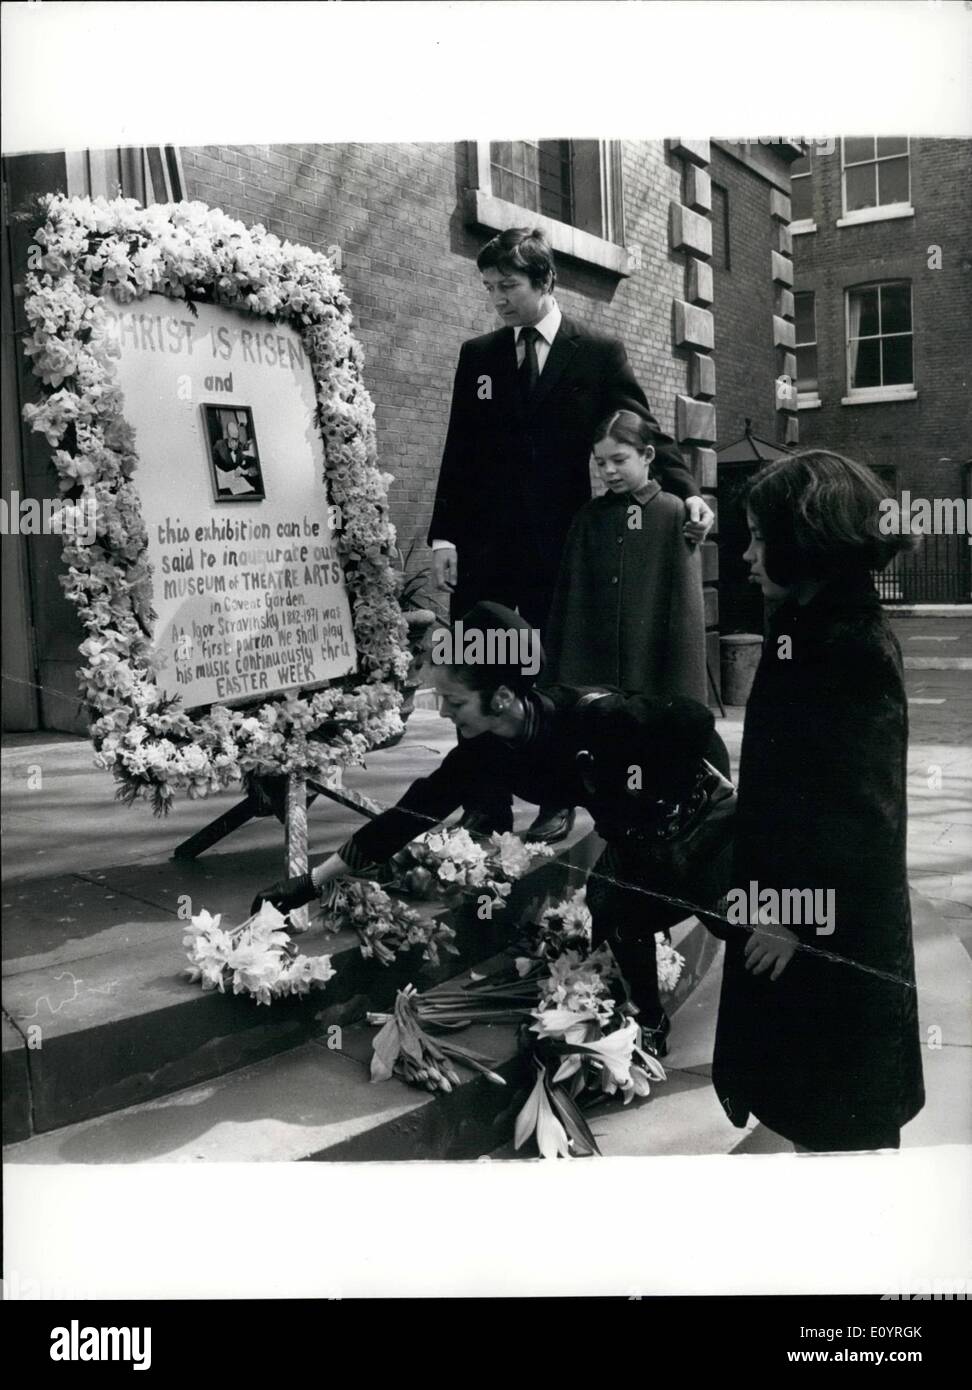 Apr. 04, 1971 - Atribute to the composer Igor Stravinsky photo shows Atribute yesterday to the composer Igor Stravinsky, who died last week at the age of 88)from Mryon Lane, the ballet dancer, outside St. Paul's church, cevent garden, built originally about 1631 by Inigo Jones and in whose churchyard lie the remains of Dr. Thomas Arne, who composed ''Rule Britannia''. looking on is miss lane's husband, the dancer David Blair, and their twin daughters, Catherine and Diana, 13. Stock Photo